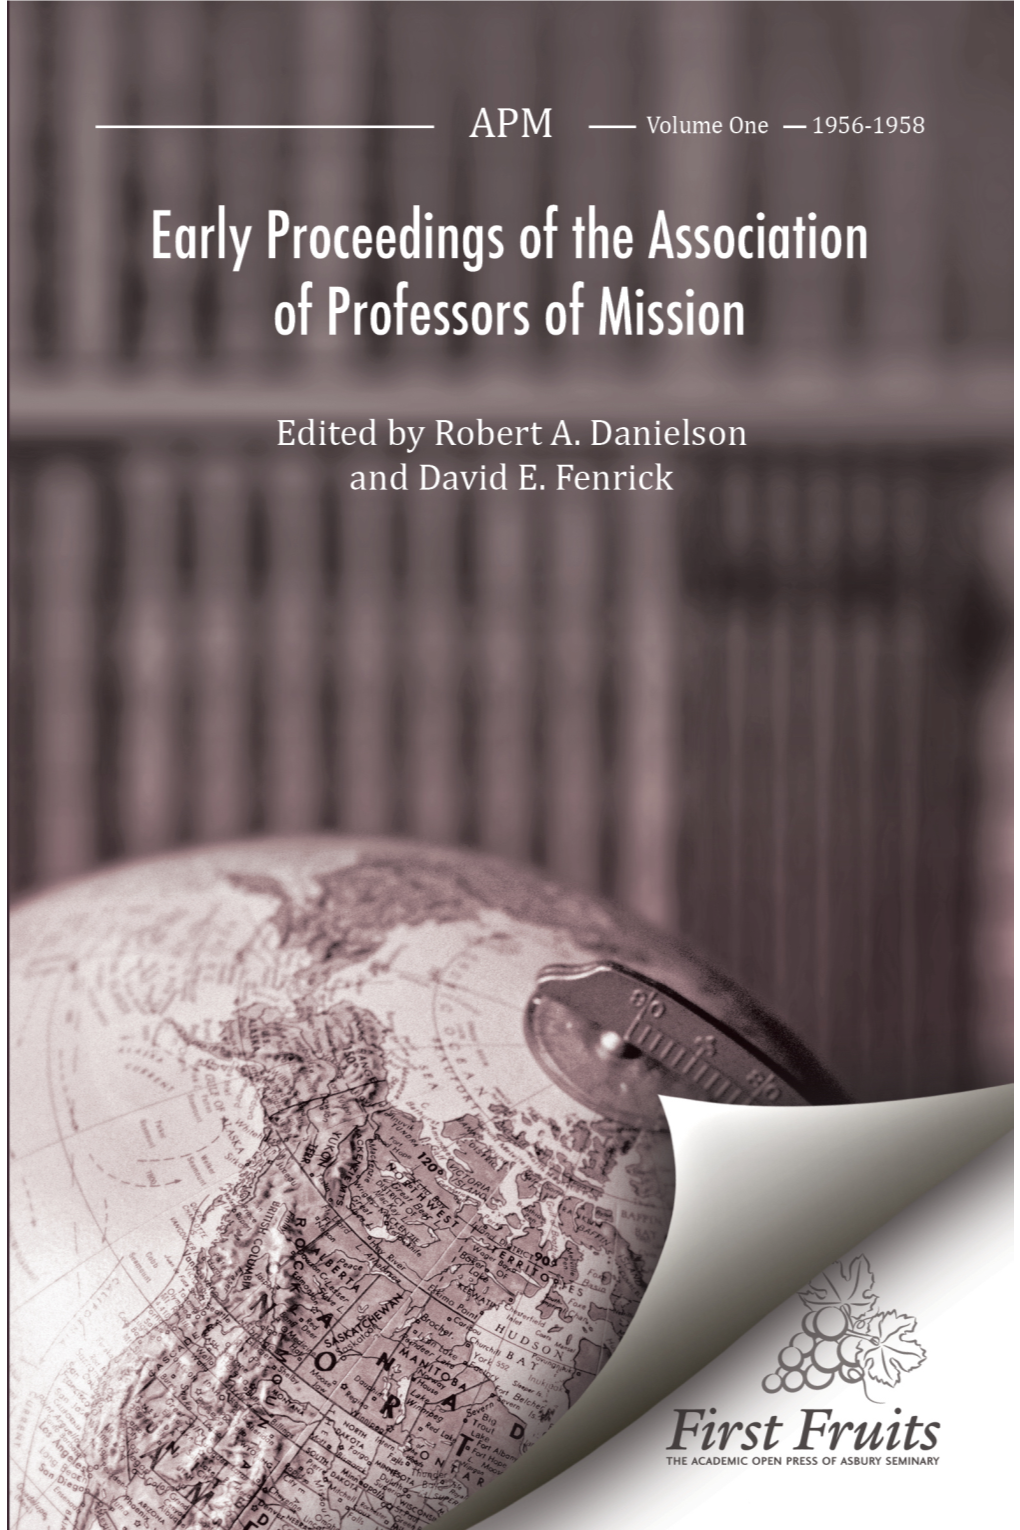 Early Proceedings of the Association of Professors of Mission. Vol 1